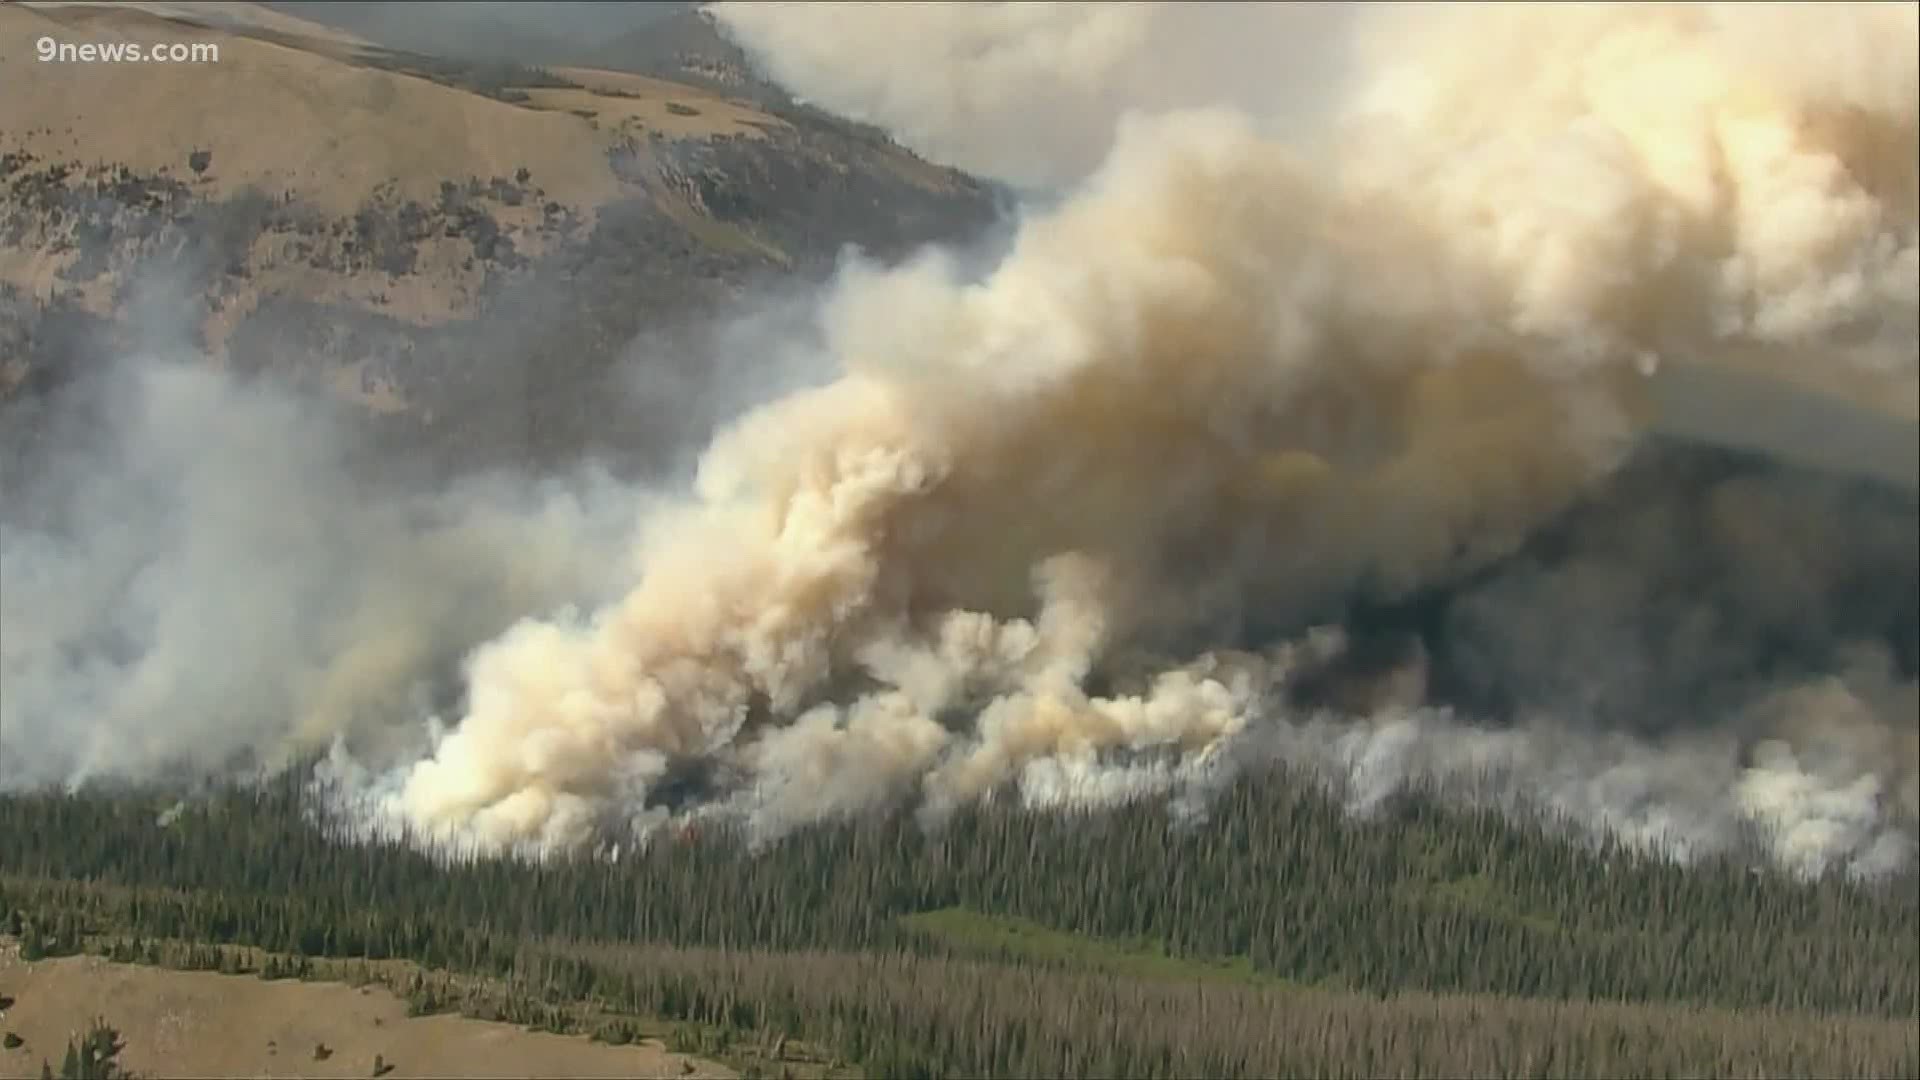 Updates on the Grizzly Creek Fire, Cameron Peak Fire, Williams Fork Fire and Pine Gulch Fire.